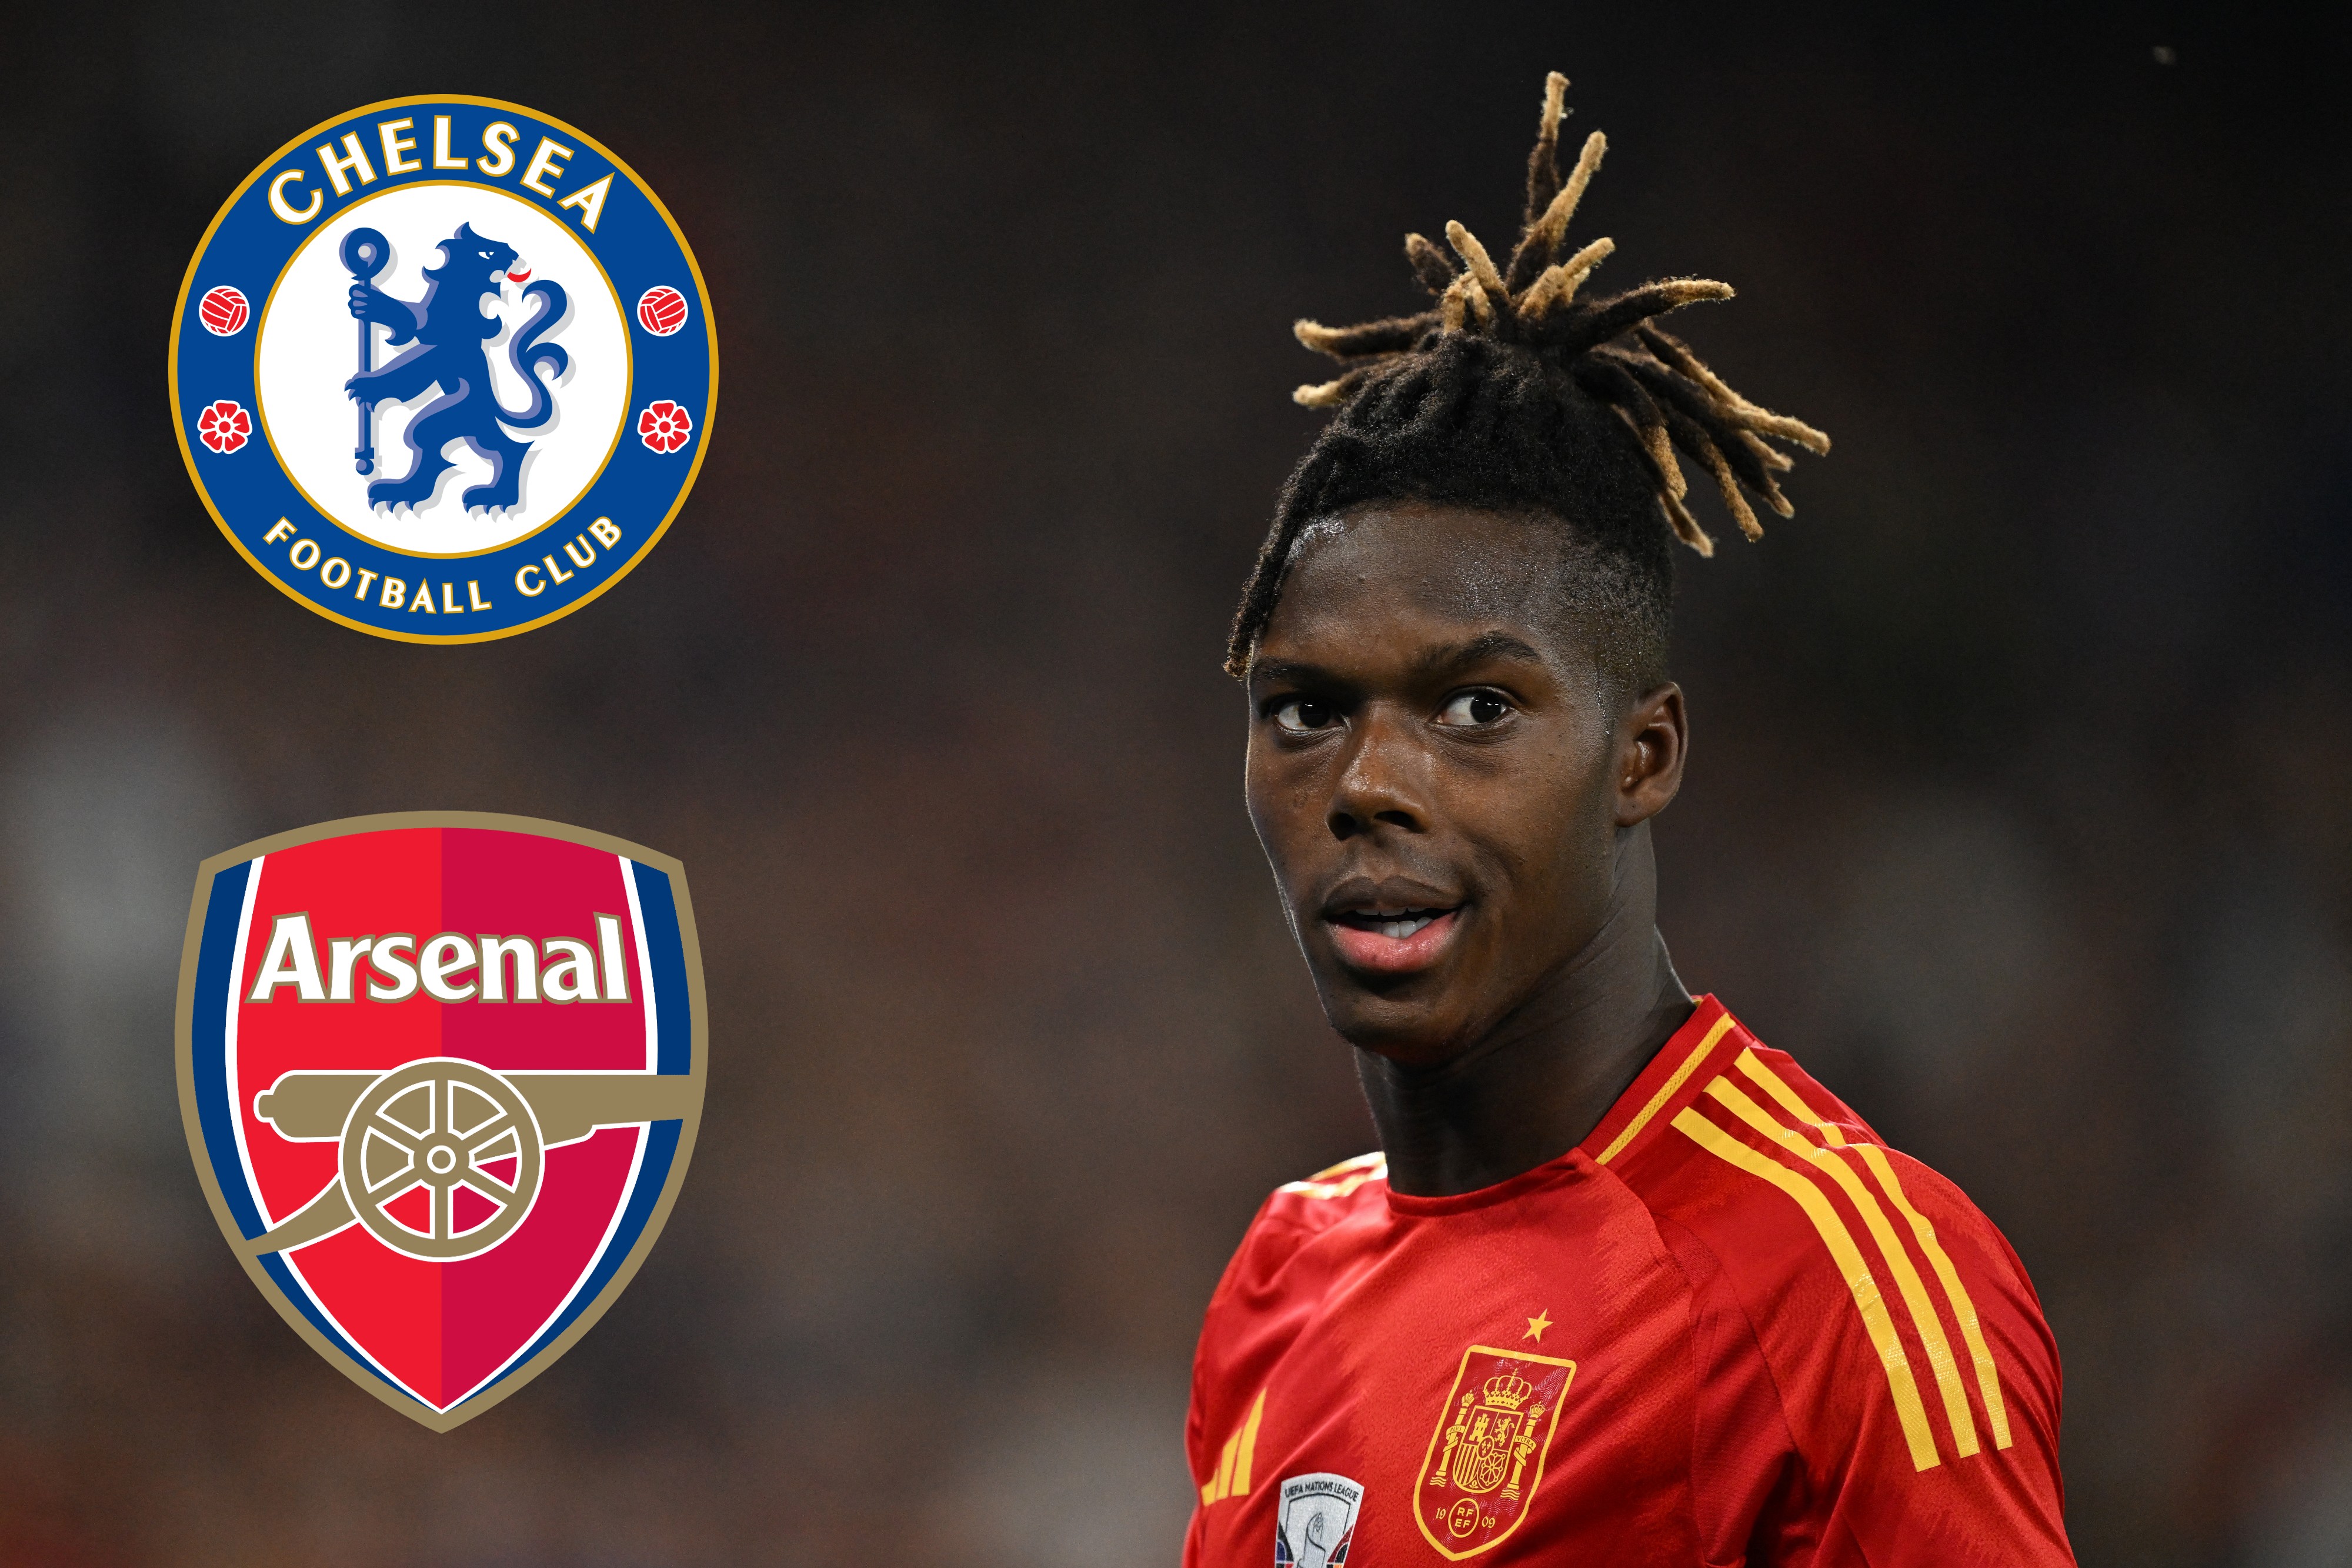 Exclusive: Arsenal ready to pay star’s €58m release clause, Chelsea also set for transfer talks